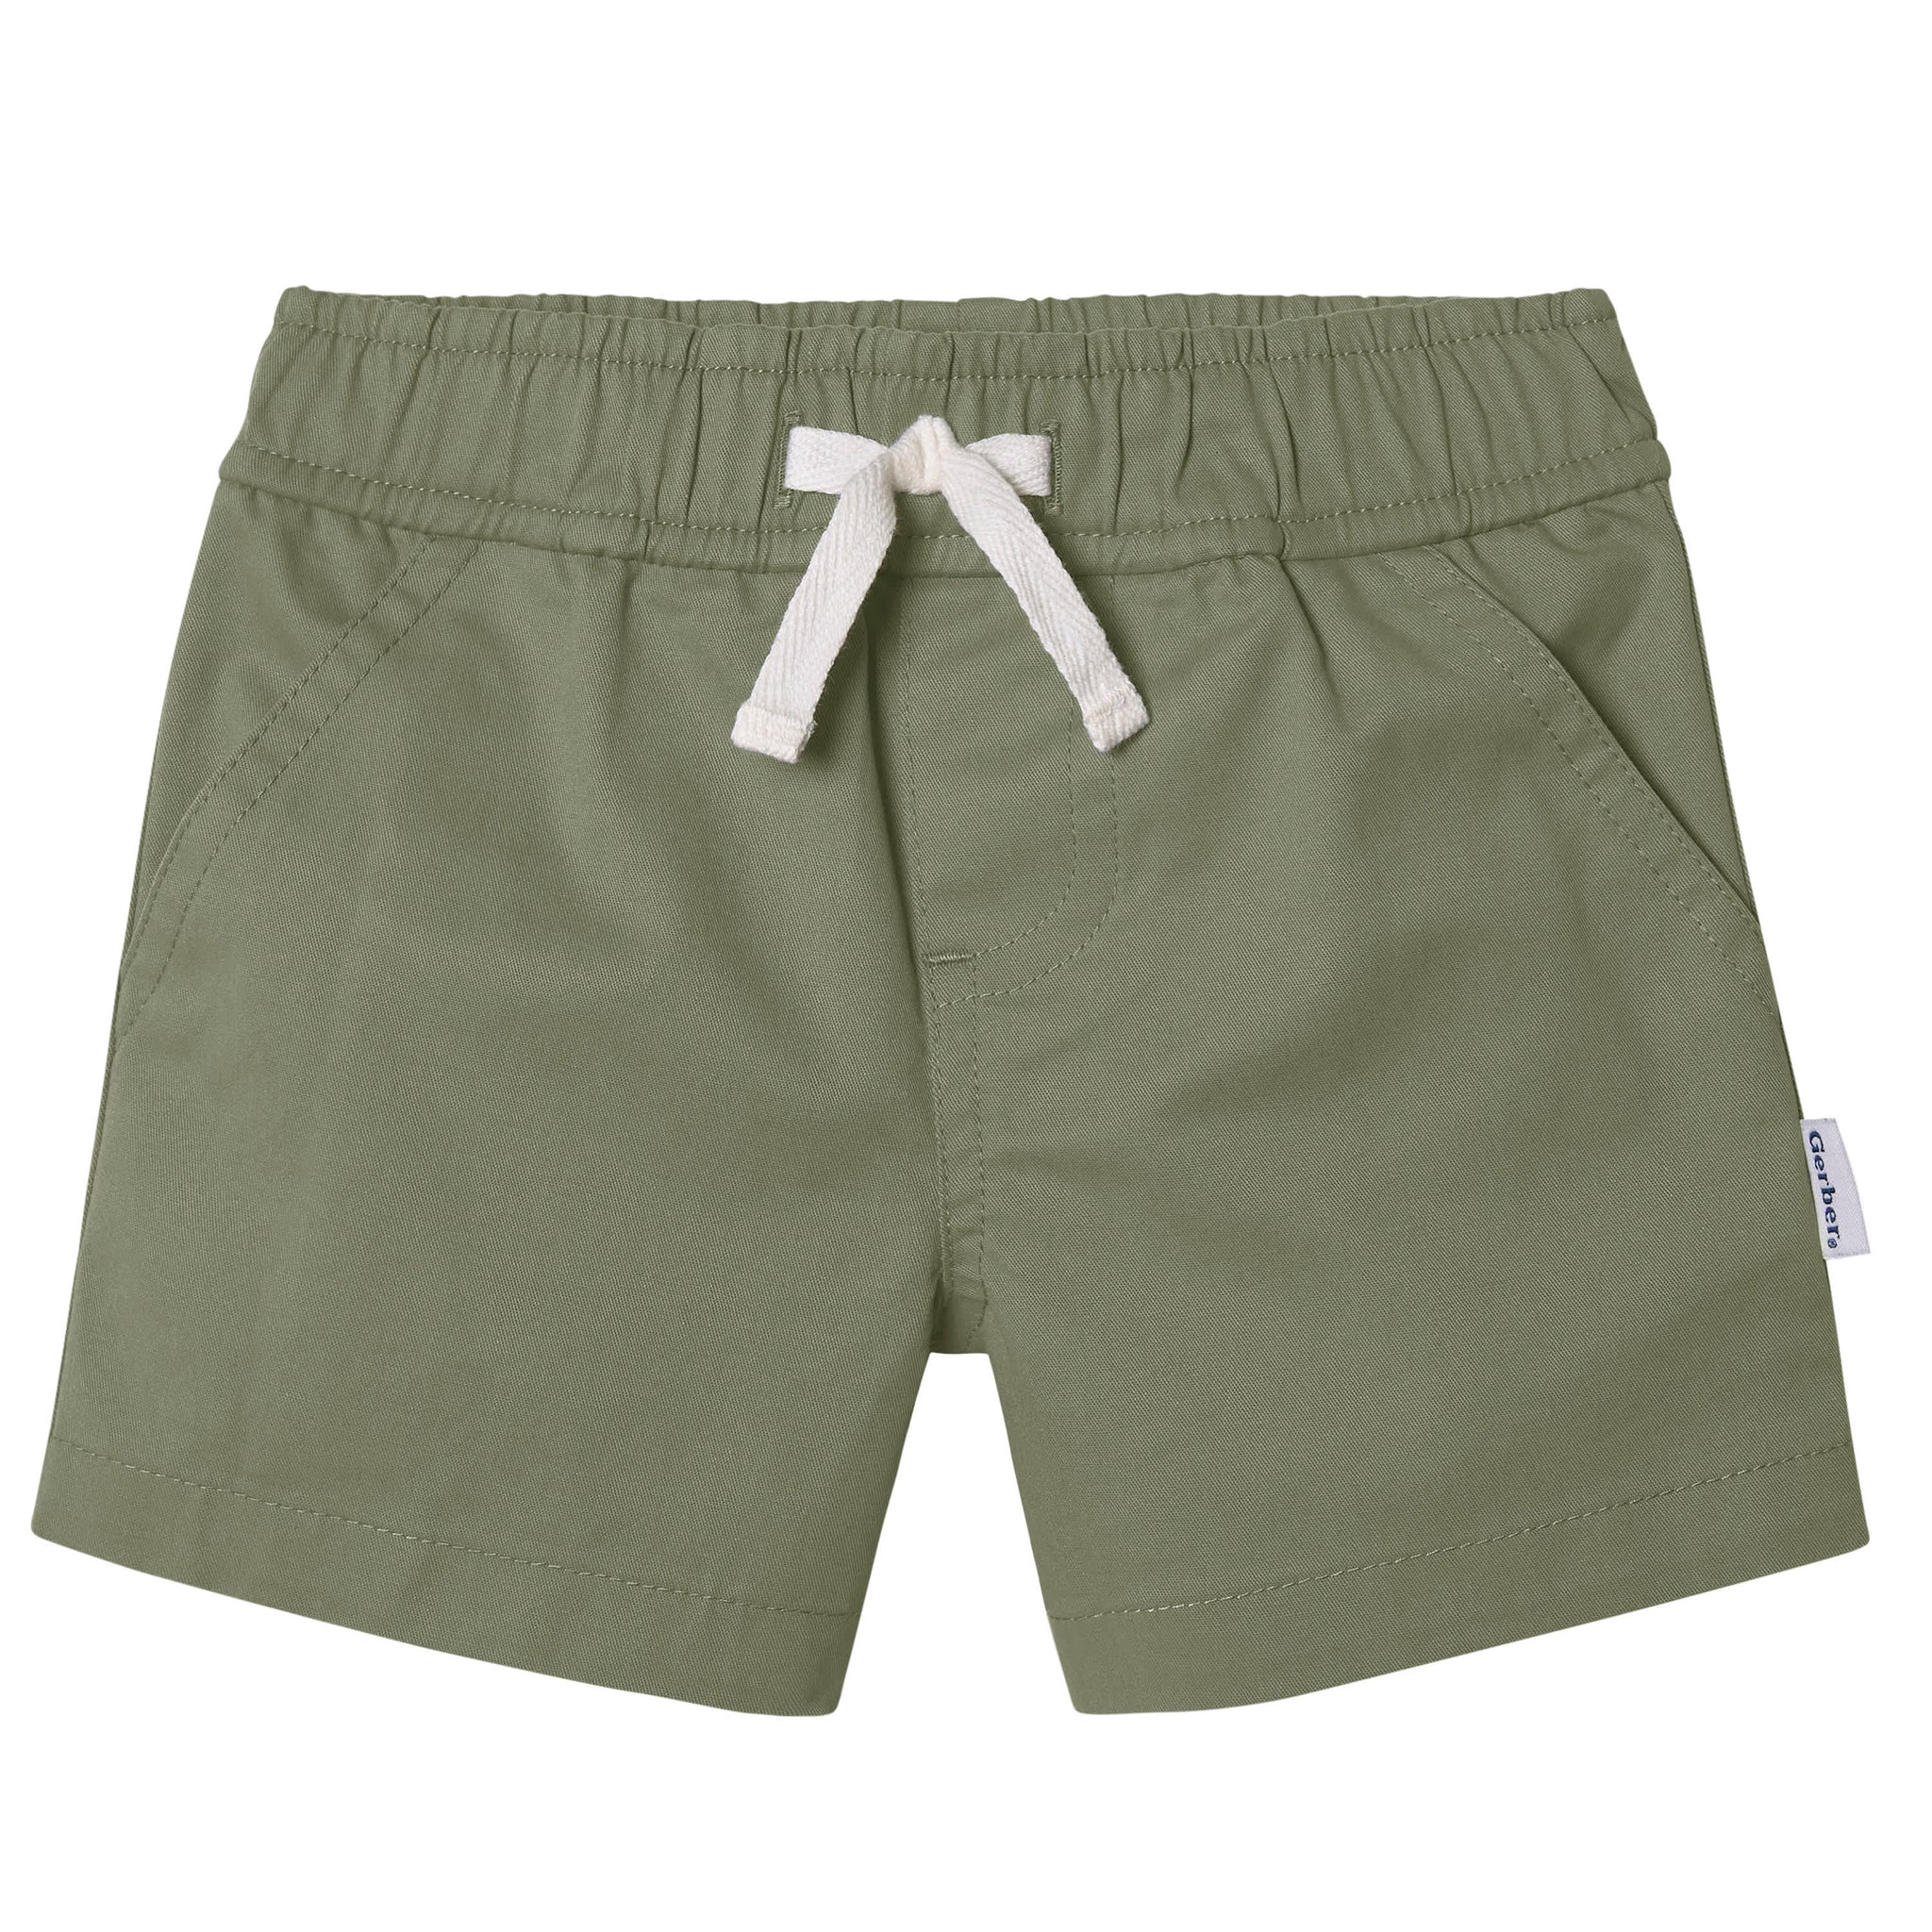 2-Pack Baby & Toddler Boys Olive and Dark Khaki Twill Shorts-Gerber Childrenswear Wholesale